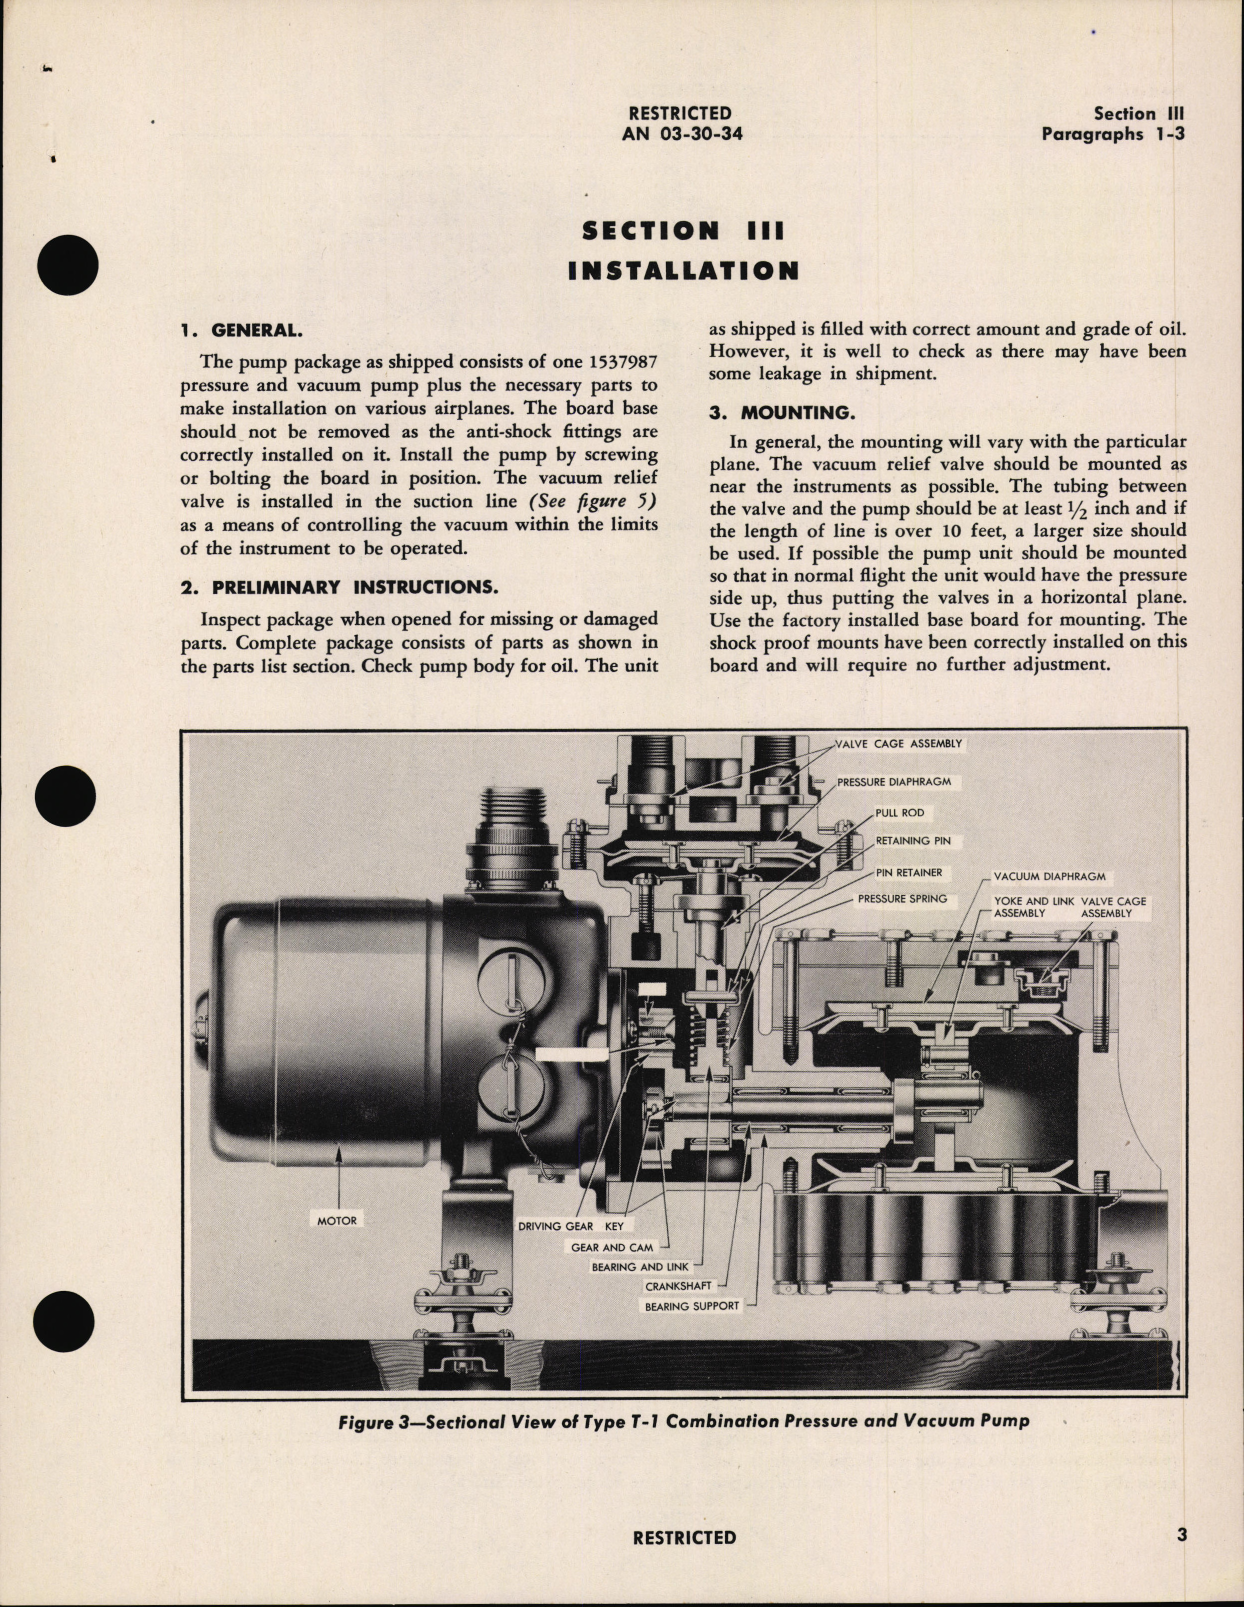 Sample page 7 from AirCorps Library document: Handbook of Instructions with Parts Catalog for Combination Pressure and vacuum Pump